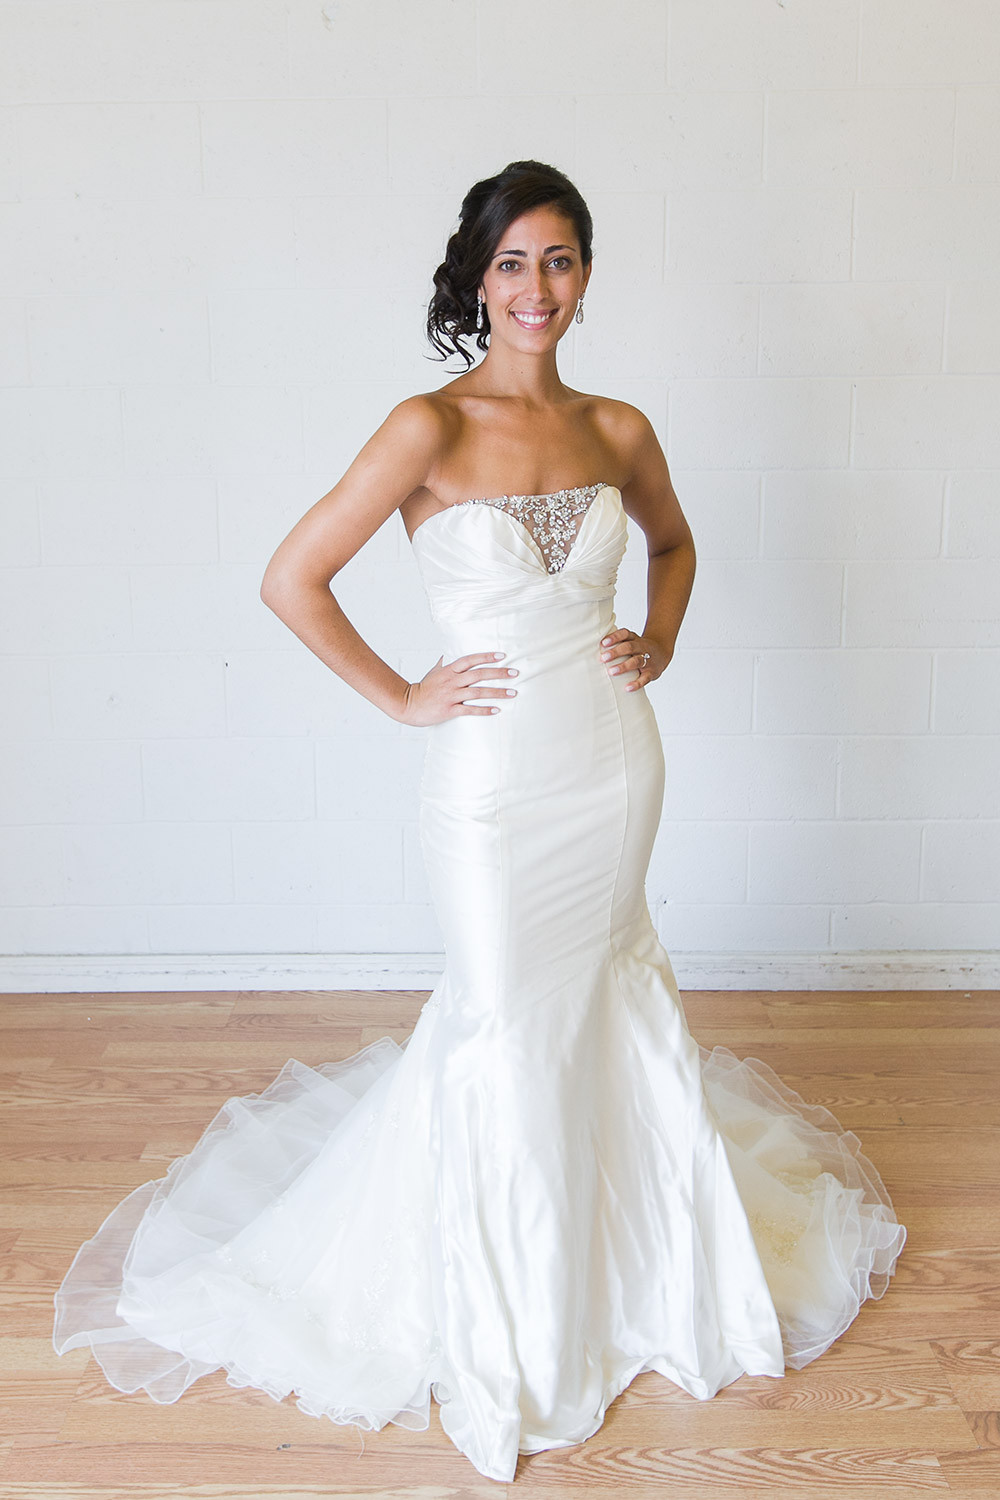 Wedding Gown Rentals
 The Pros and Cons of a Wedding Dress Rental